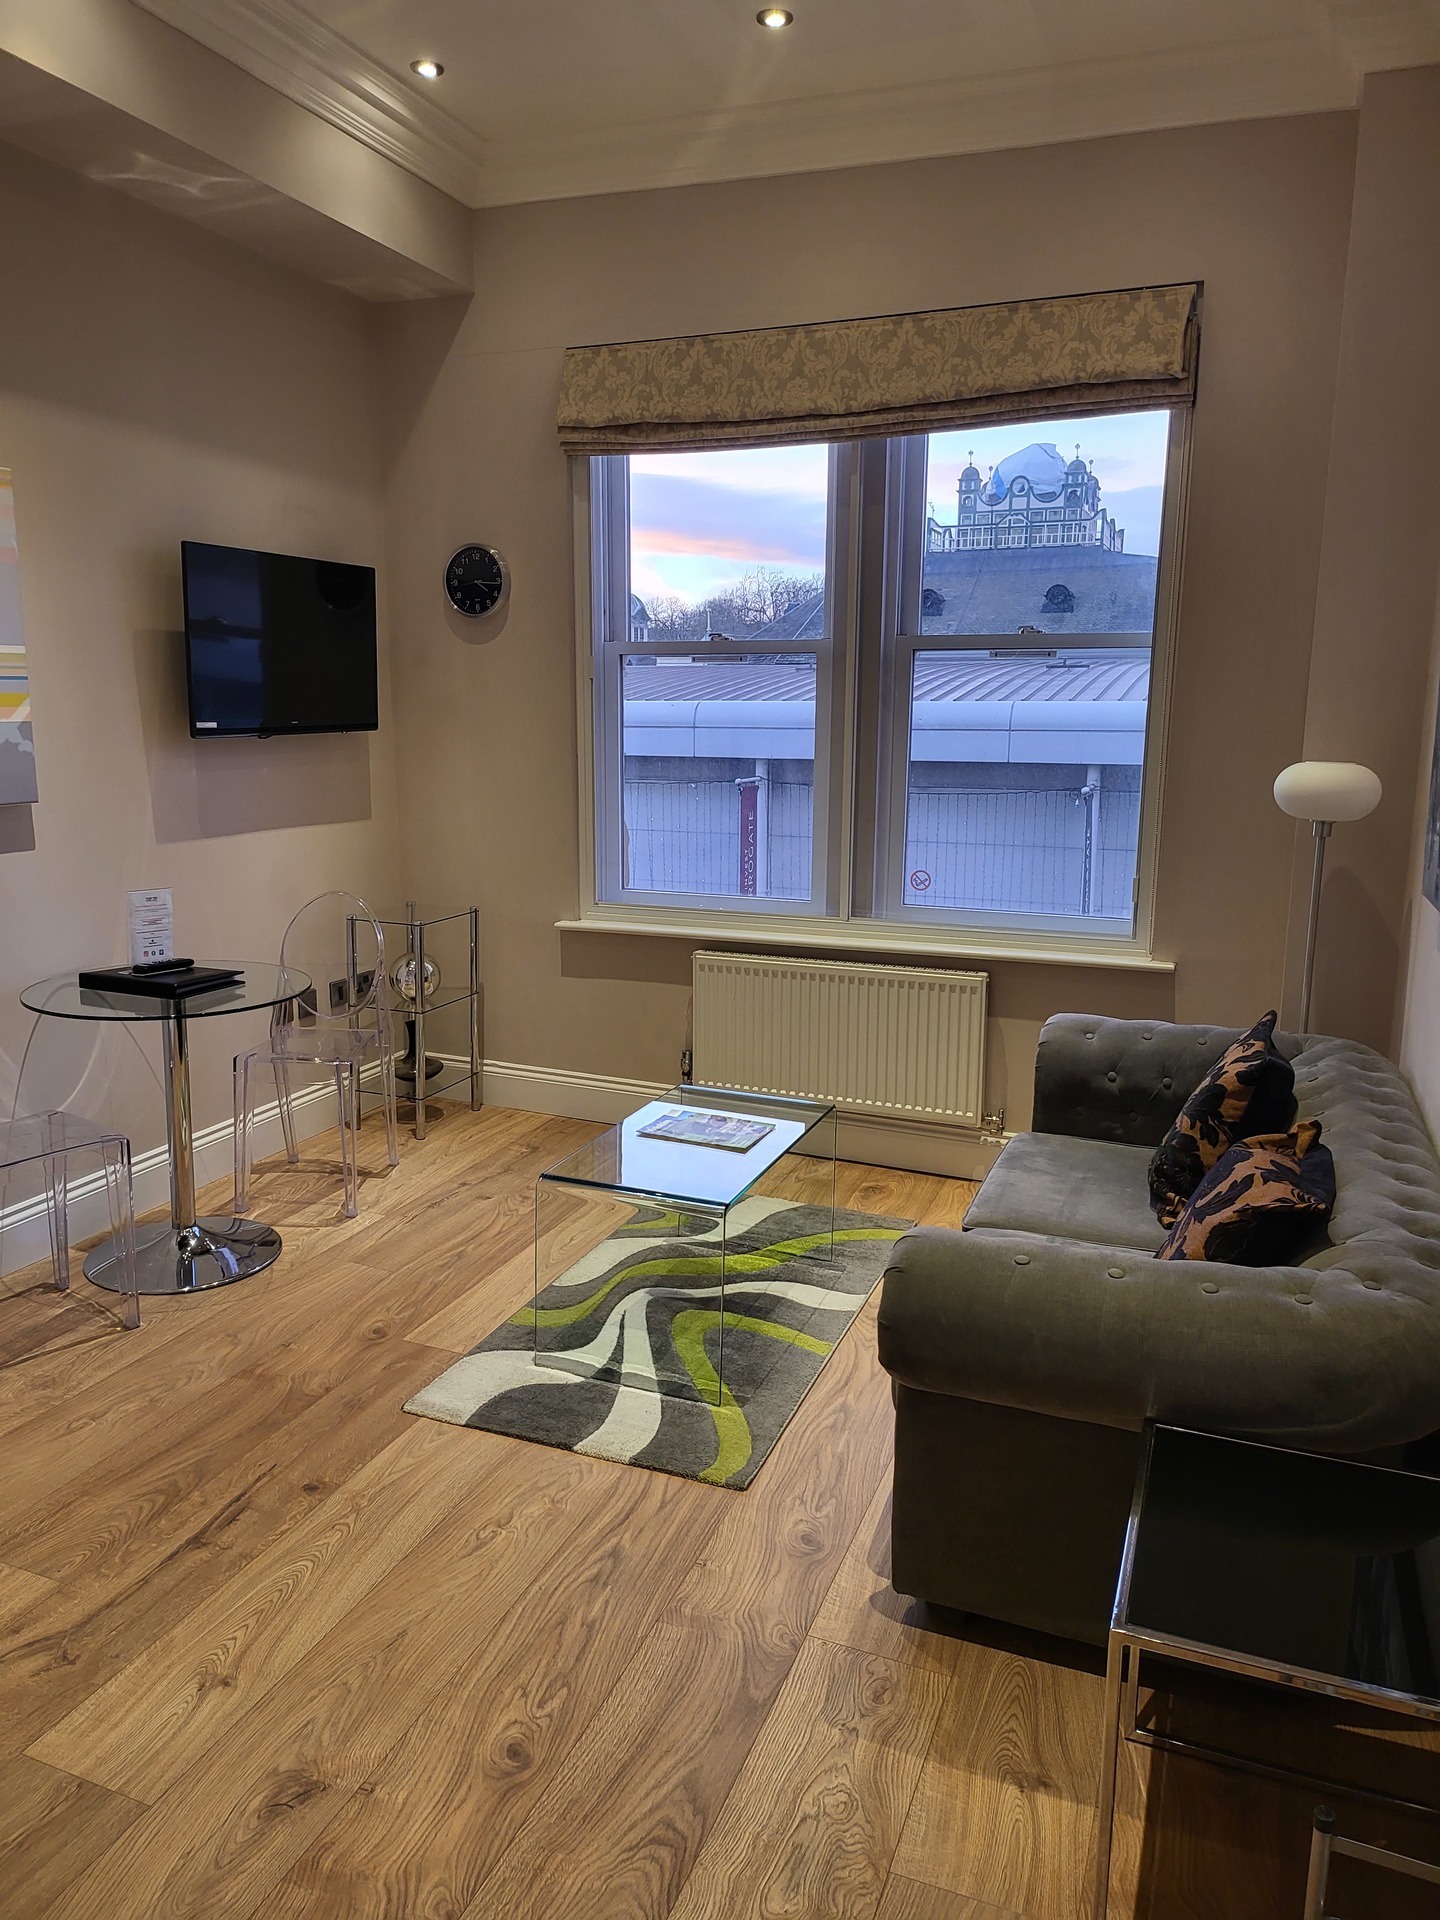 Harrogate Lifestyle Apartments One bedroom apartment to rent in Harrogate town centre Kings Road